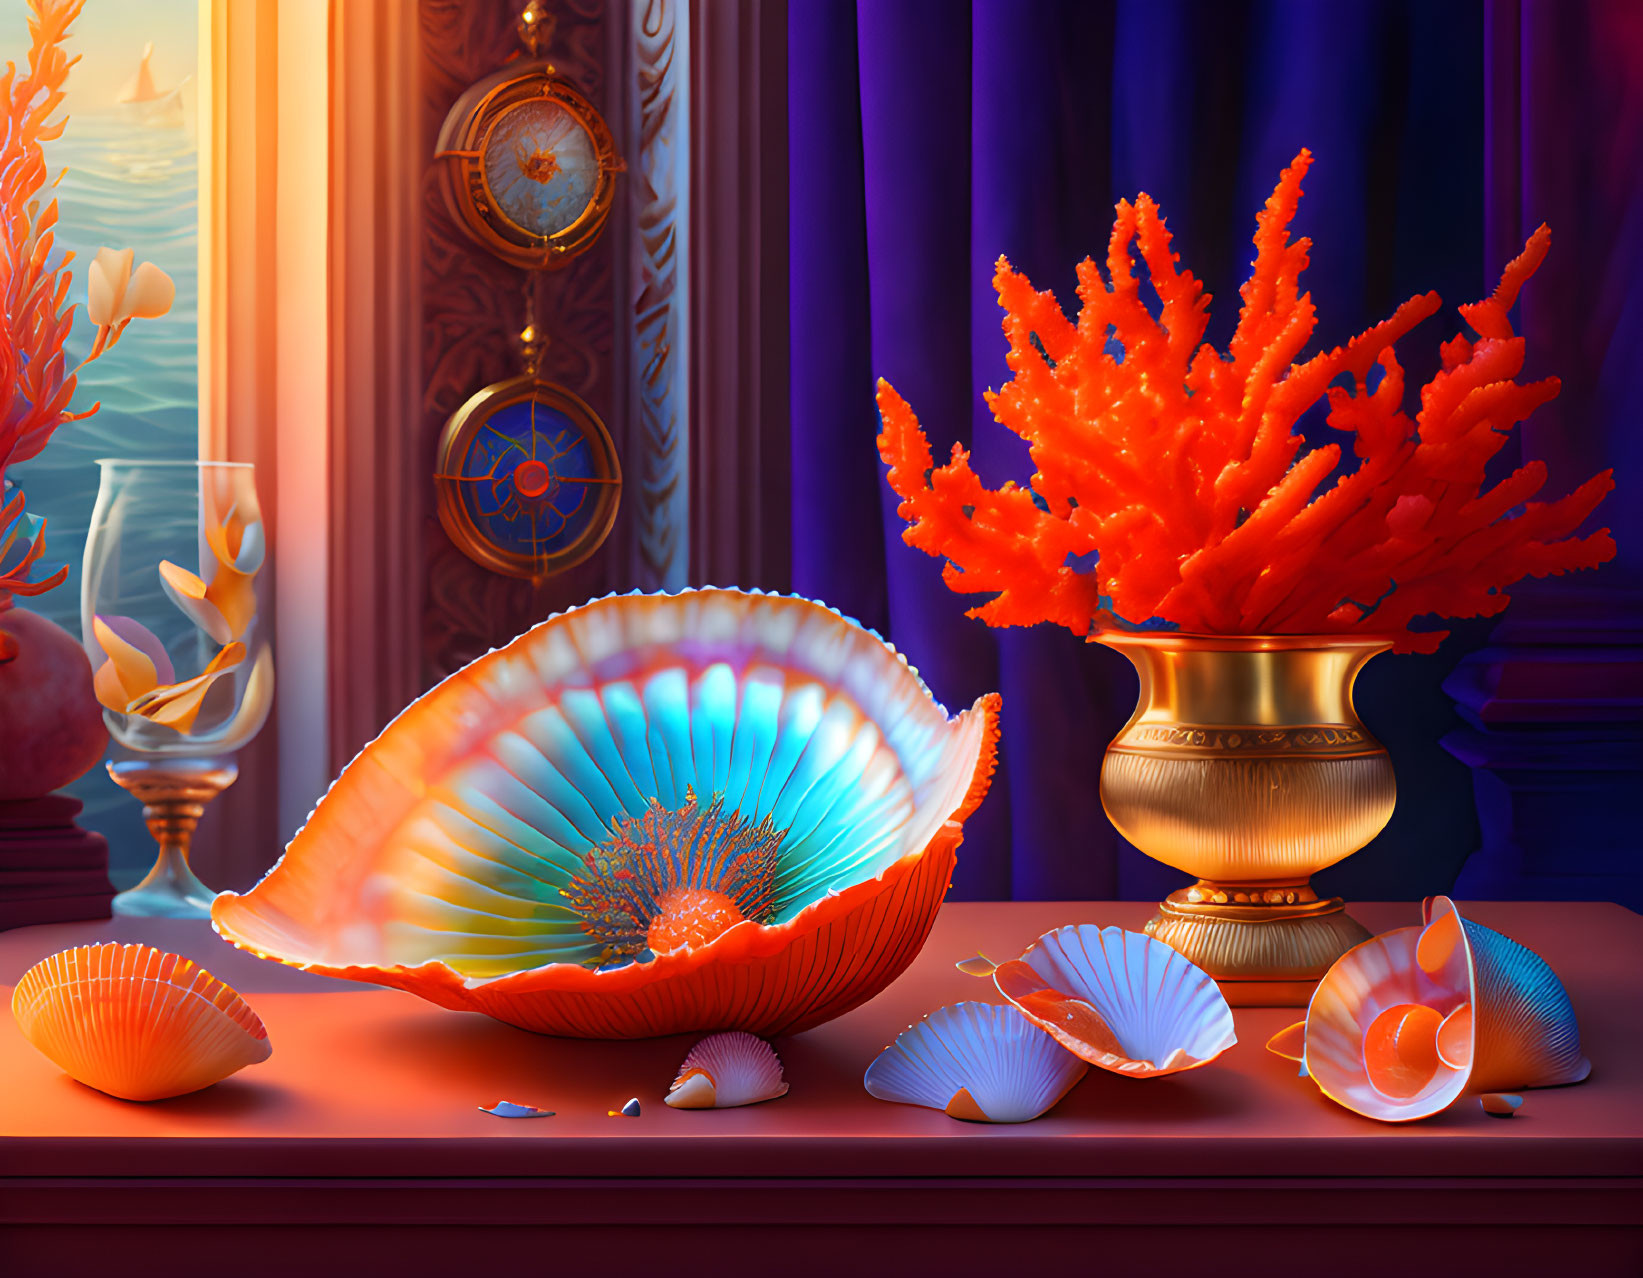 Colorful underwater-themed still life with iridescent shell, coral, and smaller shells on windowsill